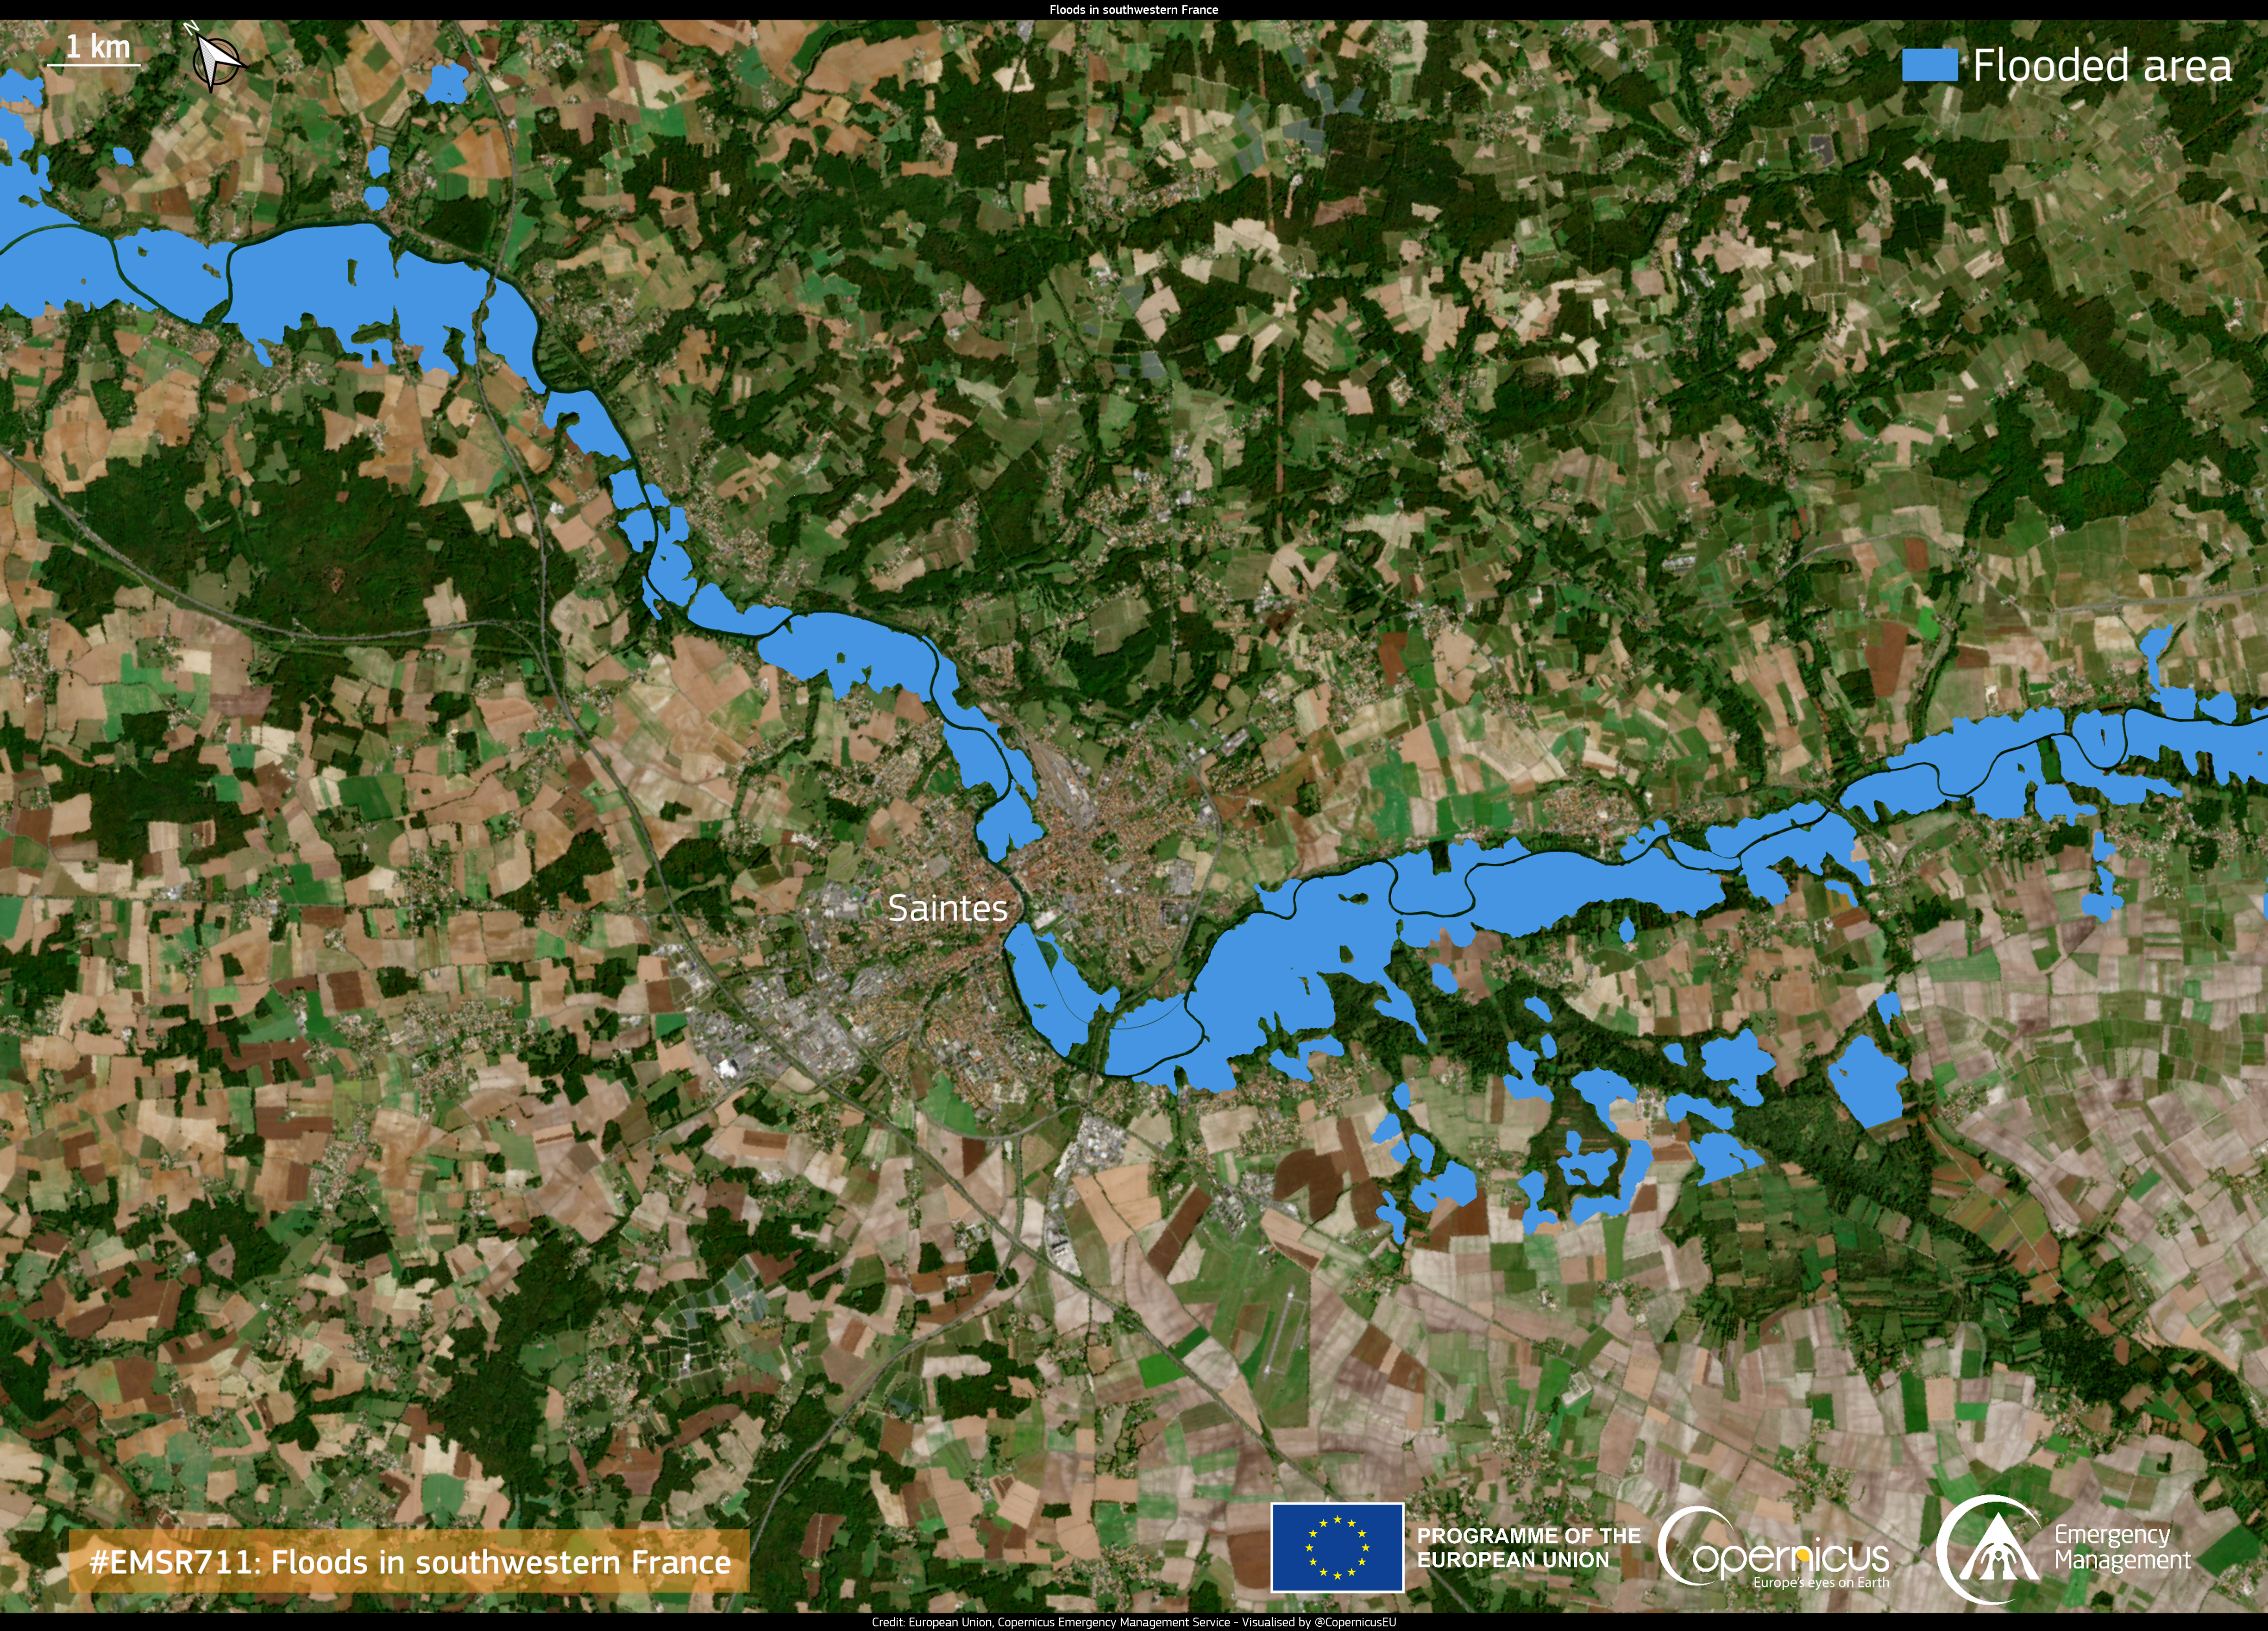 The Copernicus program showing flooded areas with semantic segmentation over a top-down view of the landscape.